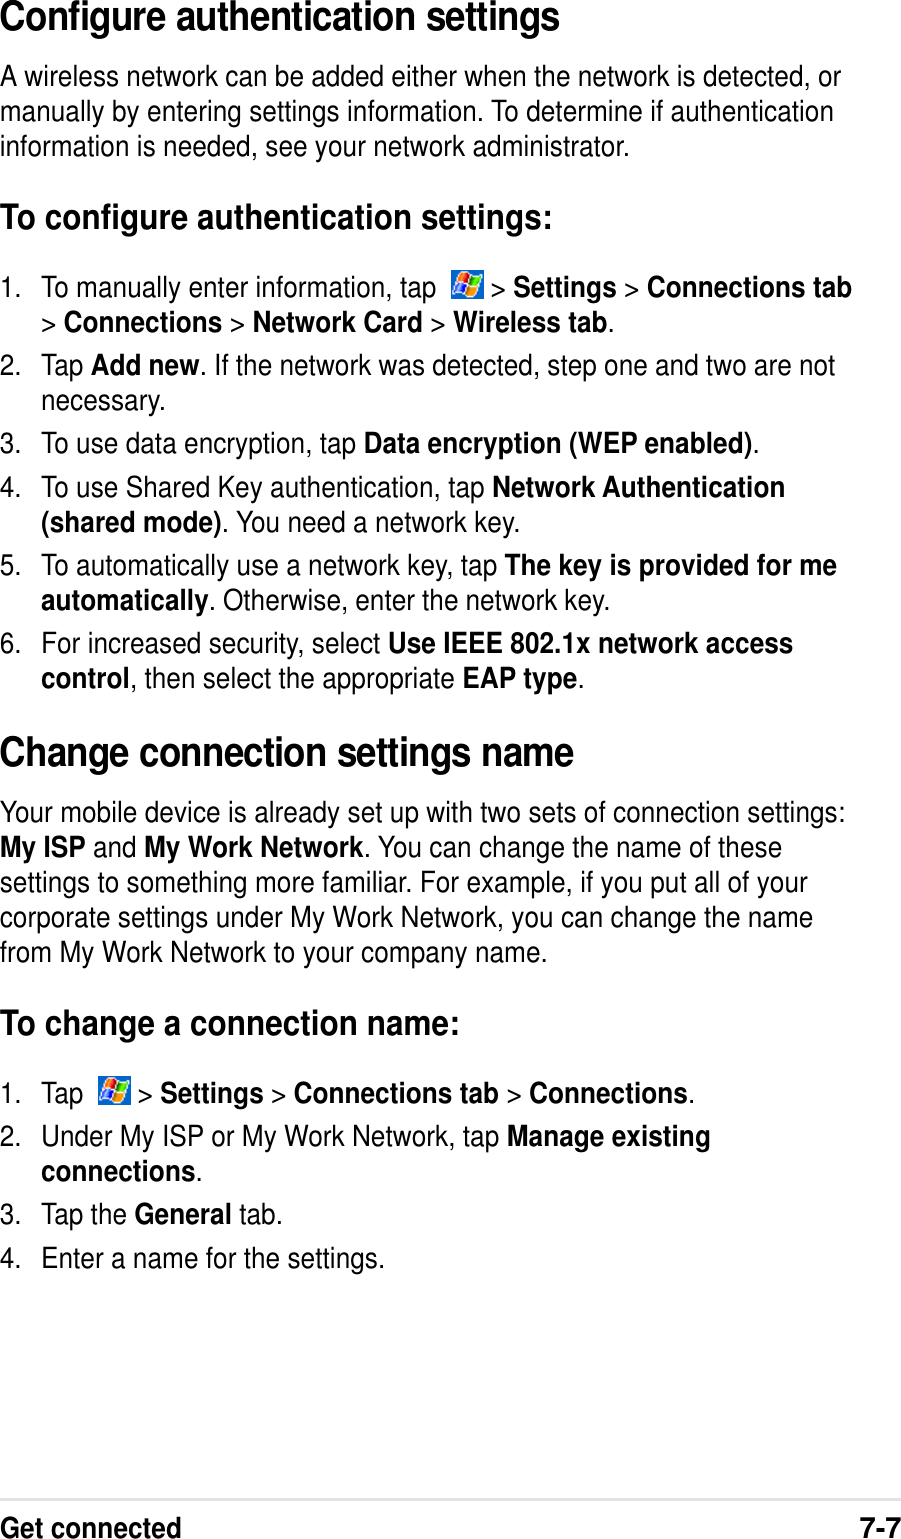 Get connected7-7Configure authentication settingsA wireless network can be added either when the network is detected, ormanually by entering settings information. To determine if authenticationinformation is needed, see your network administrator.To configure authentication settings:1. To manually enter information, tap    &gt; Settings &gt; Connections tab&gt; Connections &gt; Network Card &gt; Wireless tab.2. Tap Add new. If the network was detected, step one and two are notnecessary.3. To use data encryption, tap Data encryption (WEP enabled).4. To use Shared Key authentication, tap Network Authentication(shared mode). You need a network key.5. To automatically use a network key, tap The key is provided for meautomatically. Otherwise, enter the network key.6. For increased security, select Use IEEE 802.1x network accesscontrol, then select the appropriate EAP type.Change connection settings nameYour mobile device is already set up with two sets of connection settings:My ISP and My Work Network. You can change the name of thesesettings to something more familiar. For example, if you put all of yourcorporate settings under My Work Network, you can change the namefrom My Work Network to your company name.To change a connection name:1. Tap    &gt; Settings &gt; Connections tab &gt; Connections.2. Under My ISP or My Work Network, tap Manage existingconnections.3. Tap the General tab.4. Enter a name for the settings.